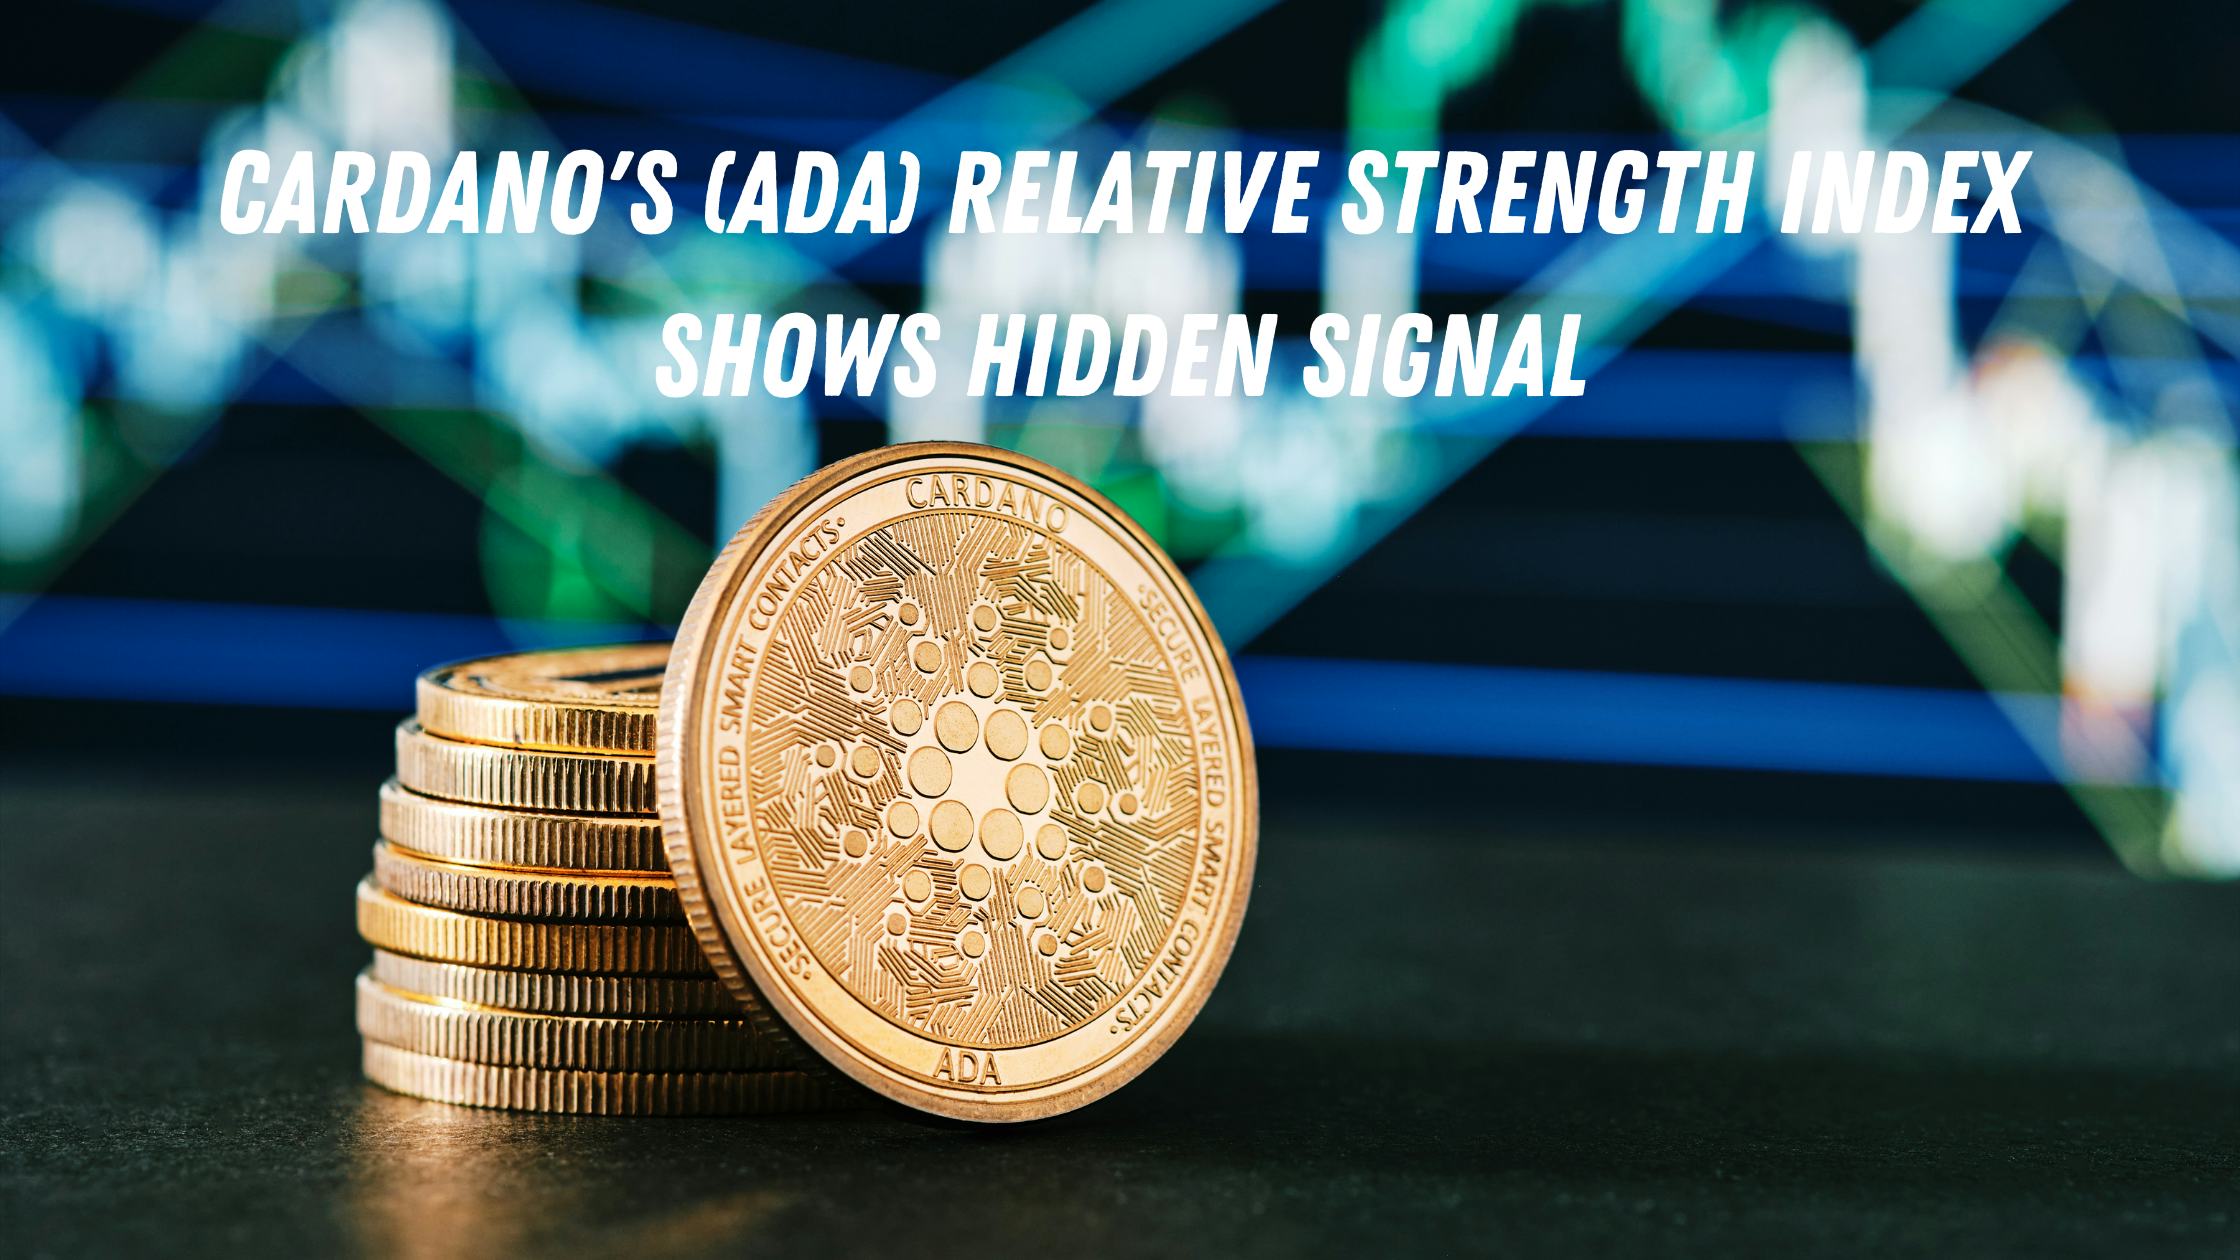 Cardano's (ADA) Relative Strength Index Shows Hidden Signal, Here's What It Is